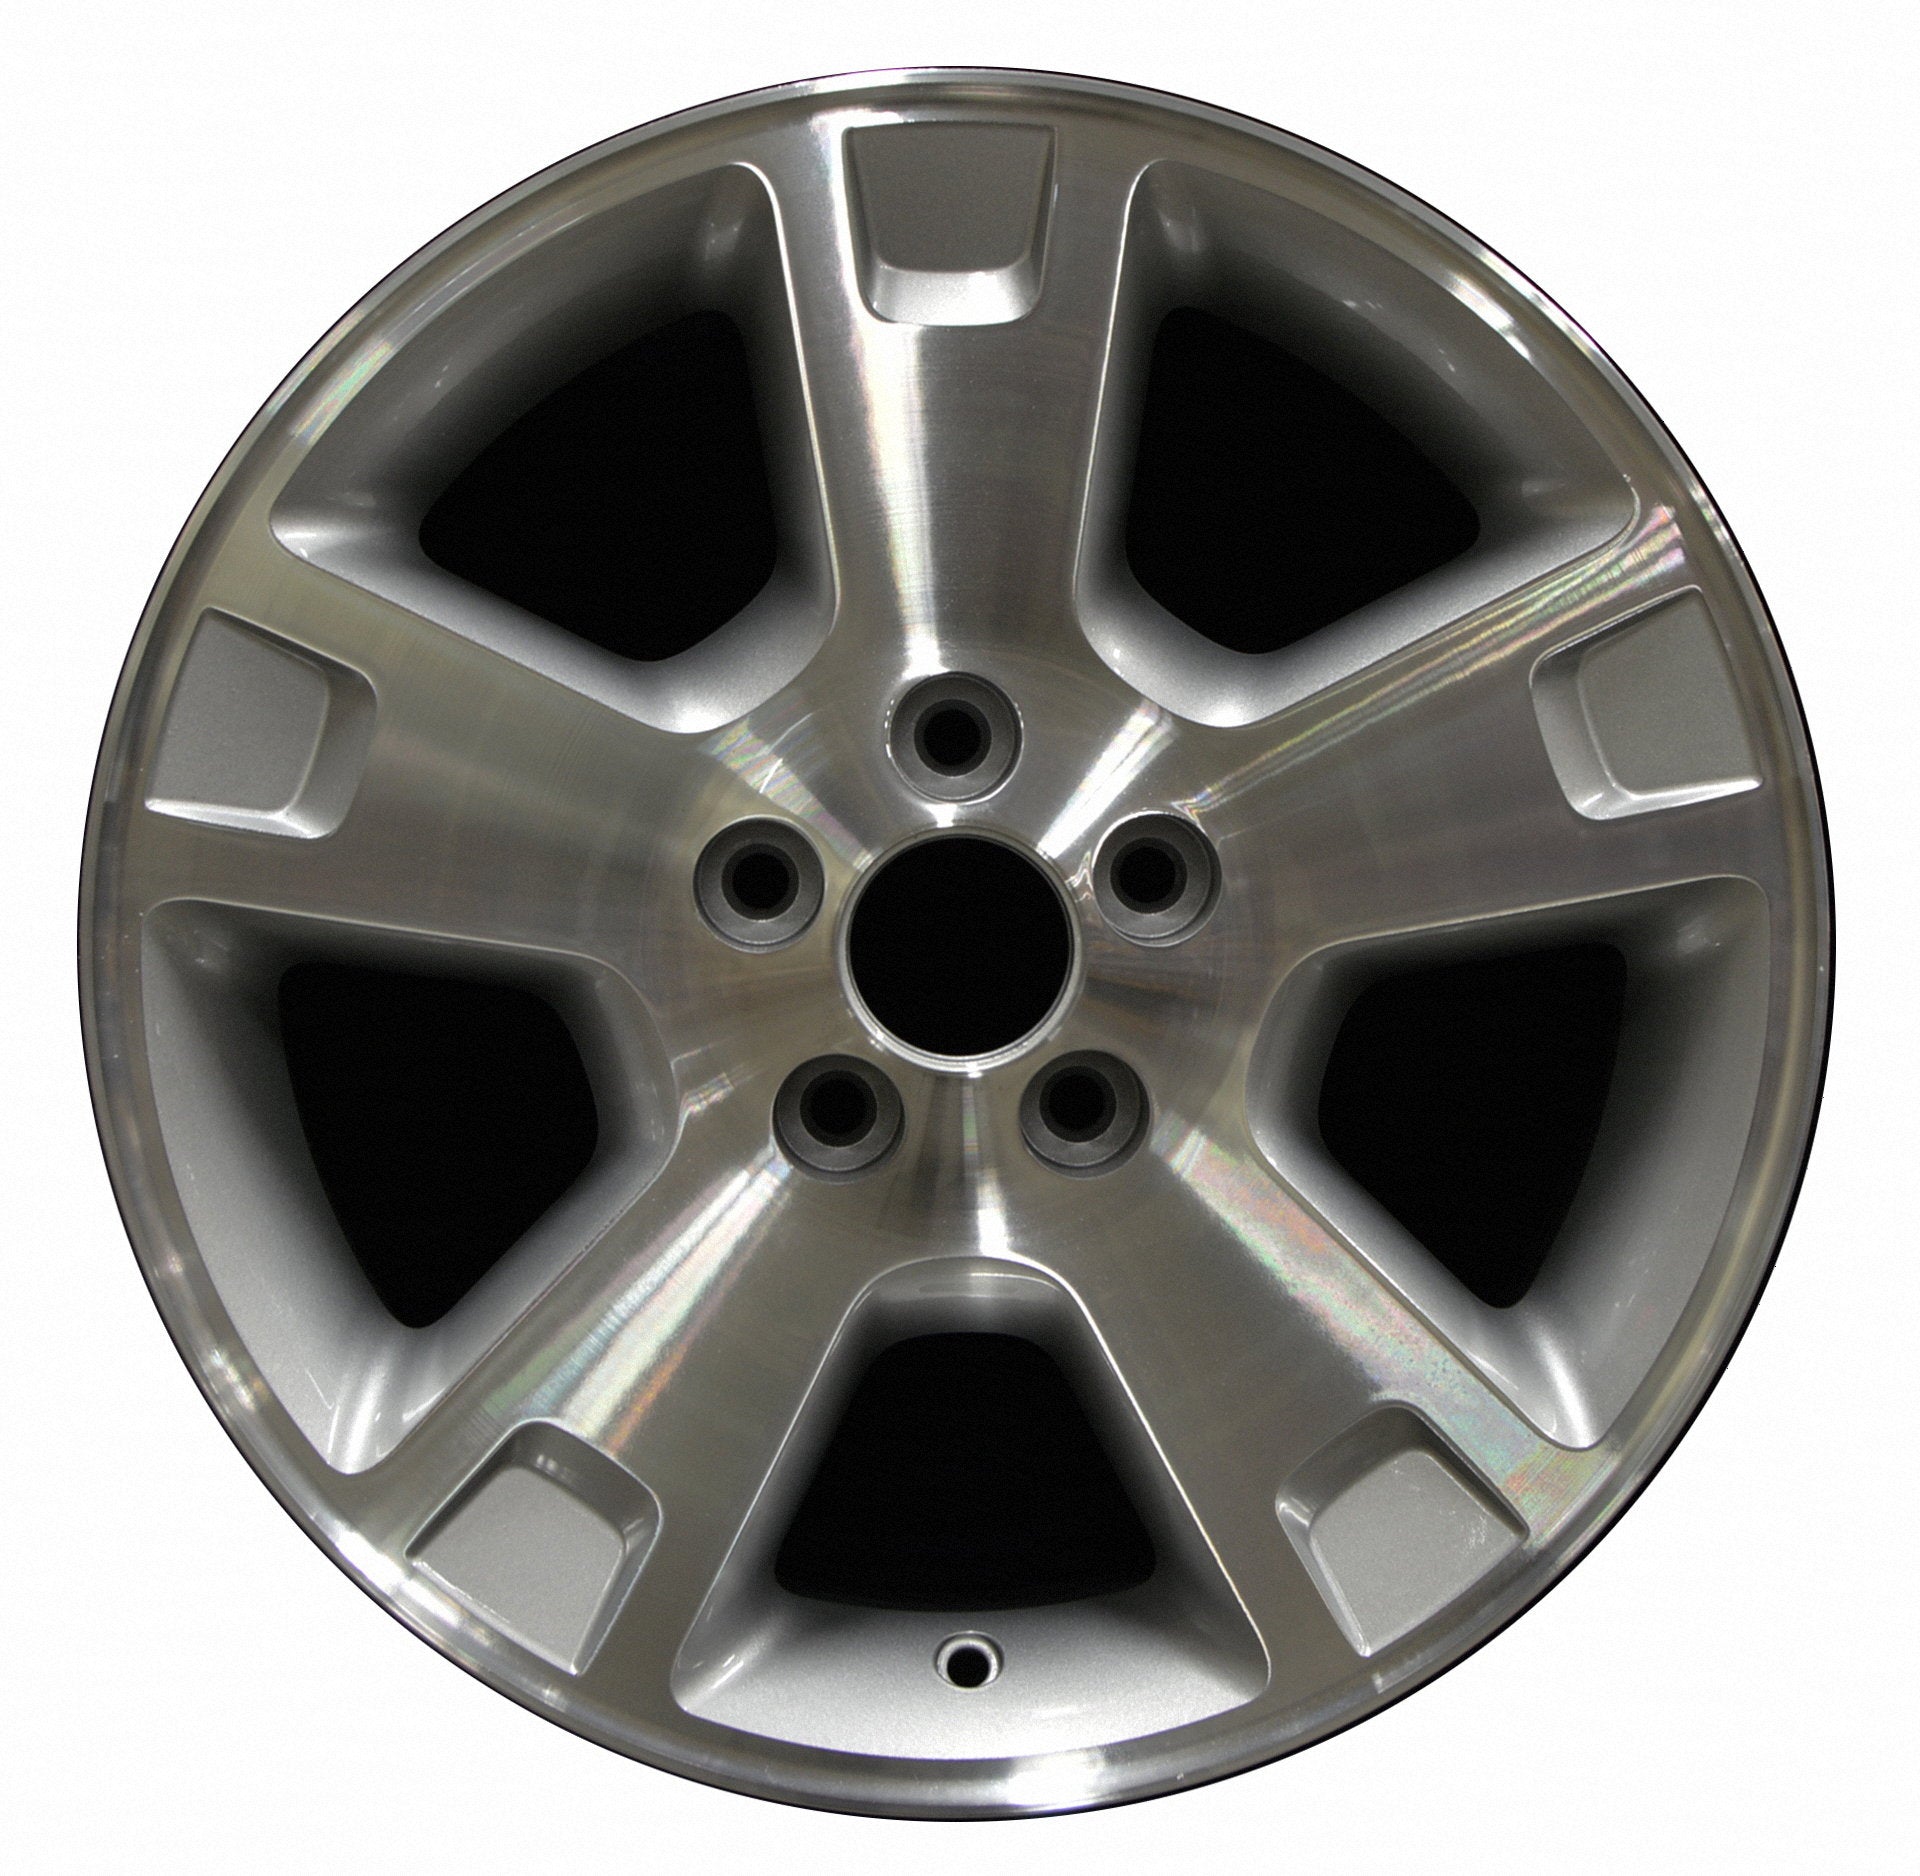 Ford Explorer  2002, 2003, 2004, 2005 Factory OEM Car Wheel Size 17x7.5 Alloy WAO.3528.PS01.MA